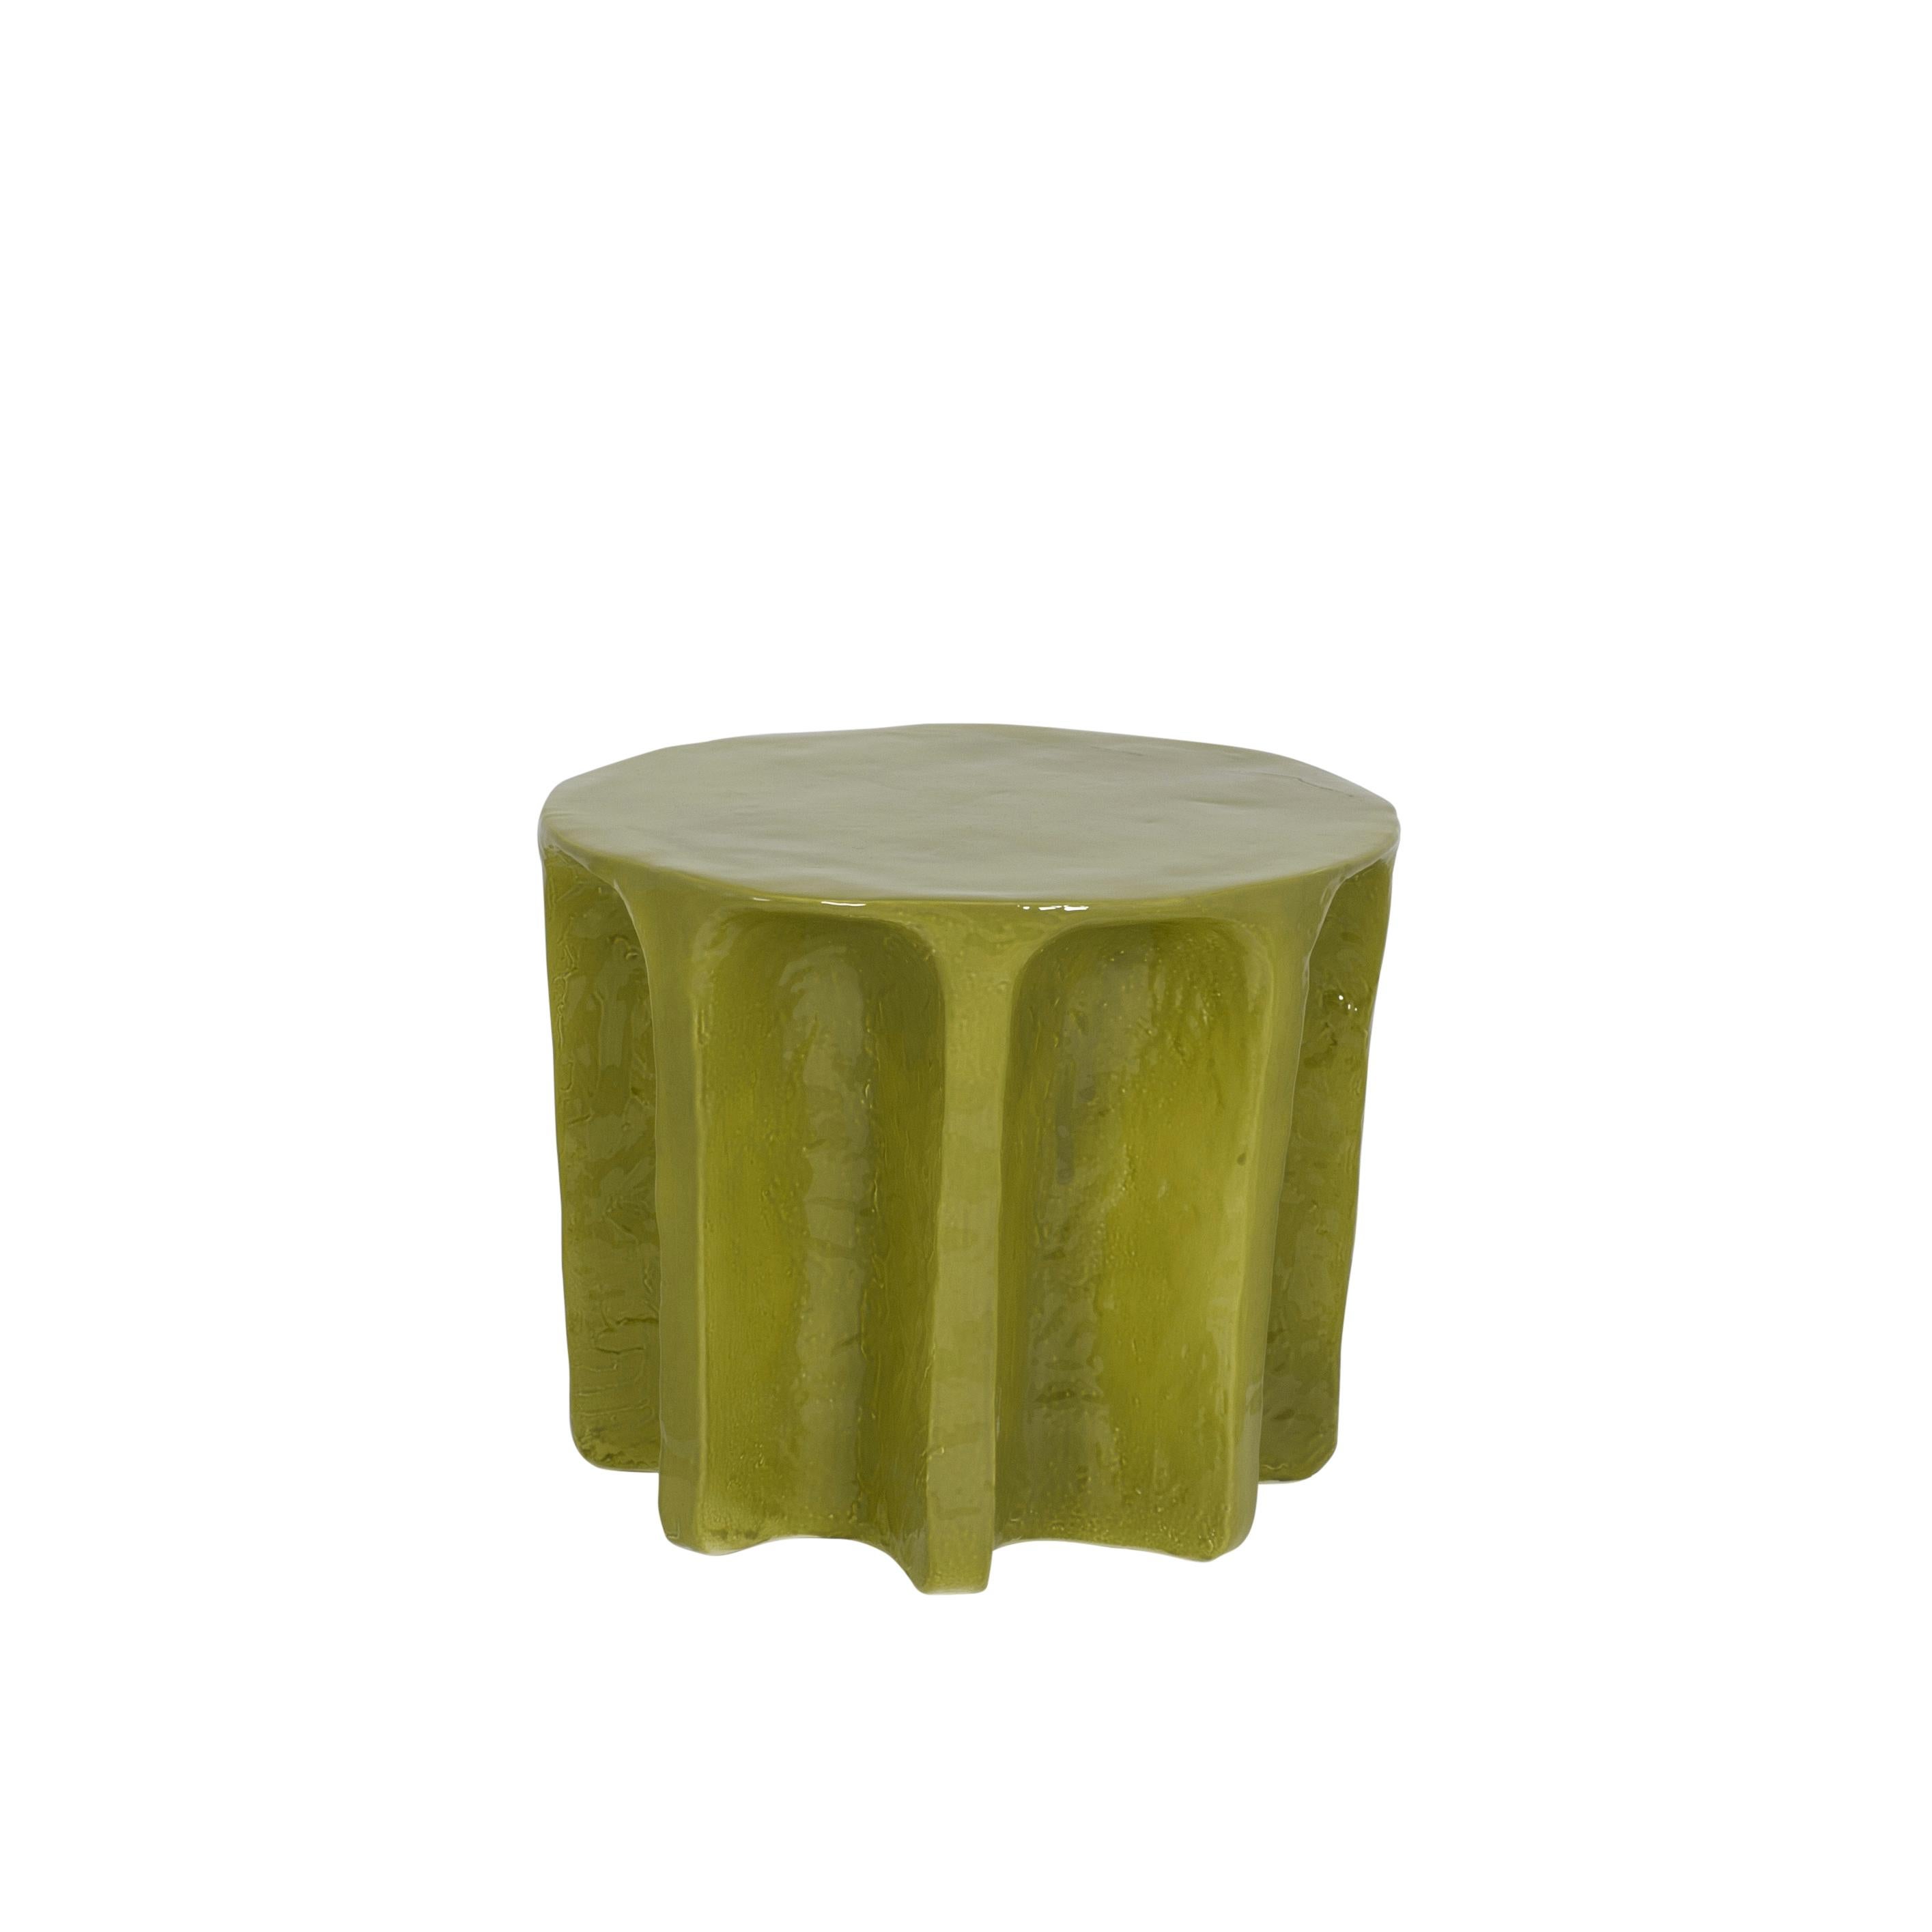 Chouchou round green coffee table by Pulpo
Dimensions: D55 x H45 cm
Materials: ceramic

Also available in different Colors.

Chouchou bears the contours of an antique column – which, knowing designer Lorenzo Zanovello’s, is most likely a